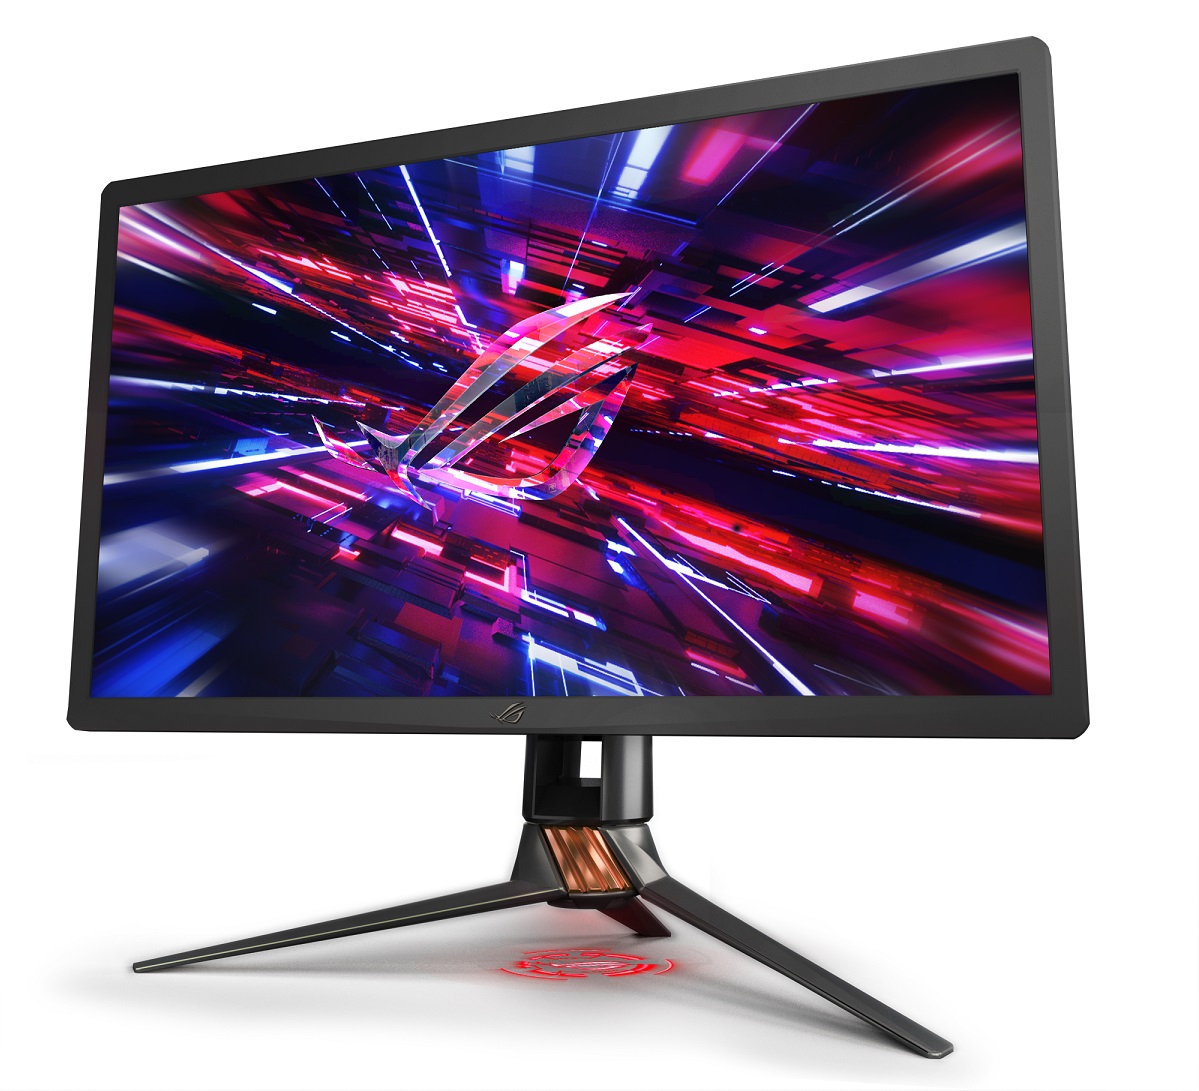 Asus Rog Swift 27 / Asus ROG Swift PG27UQ 27" IPS 4K HDR 144Hz G-Sync Gaming ... / If you want to purchase the ultimate hdr monitor now, you will automatically end up with the asus rog swift pg27uq.